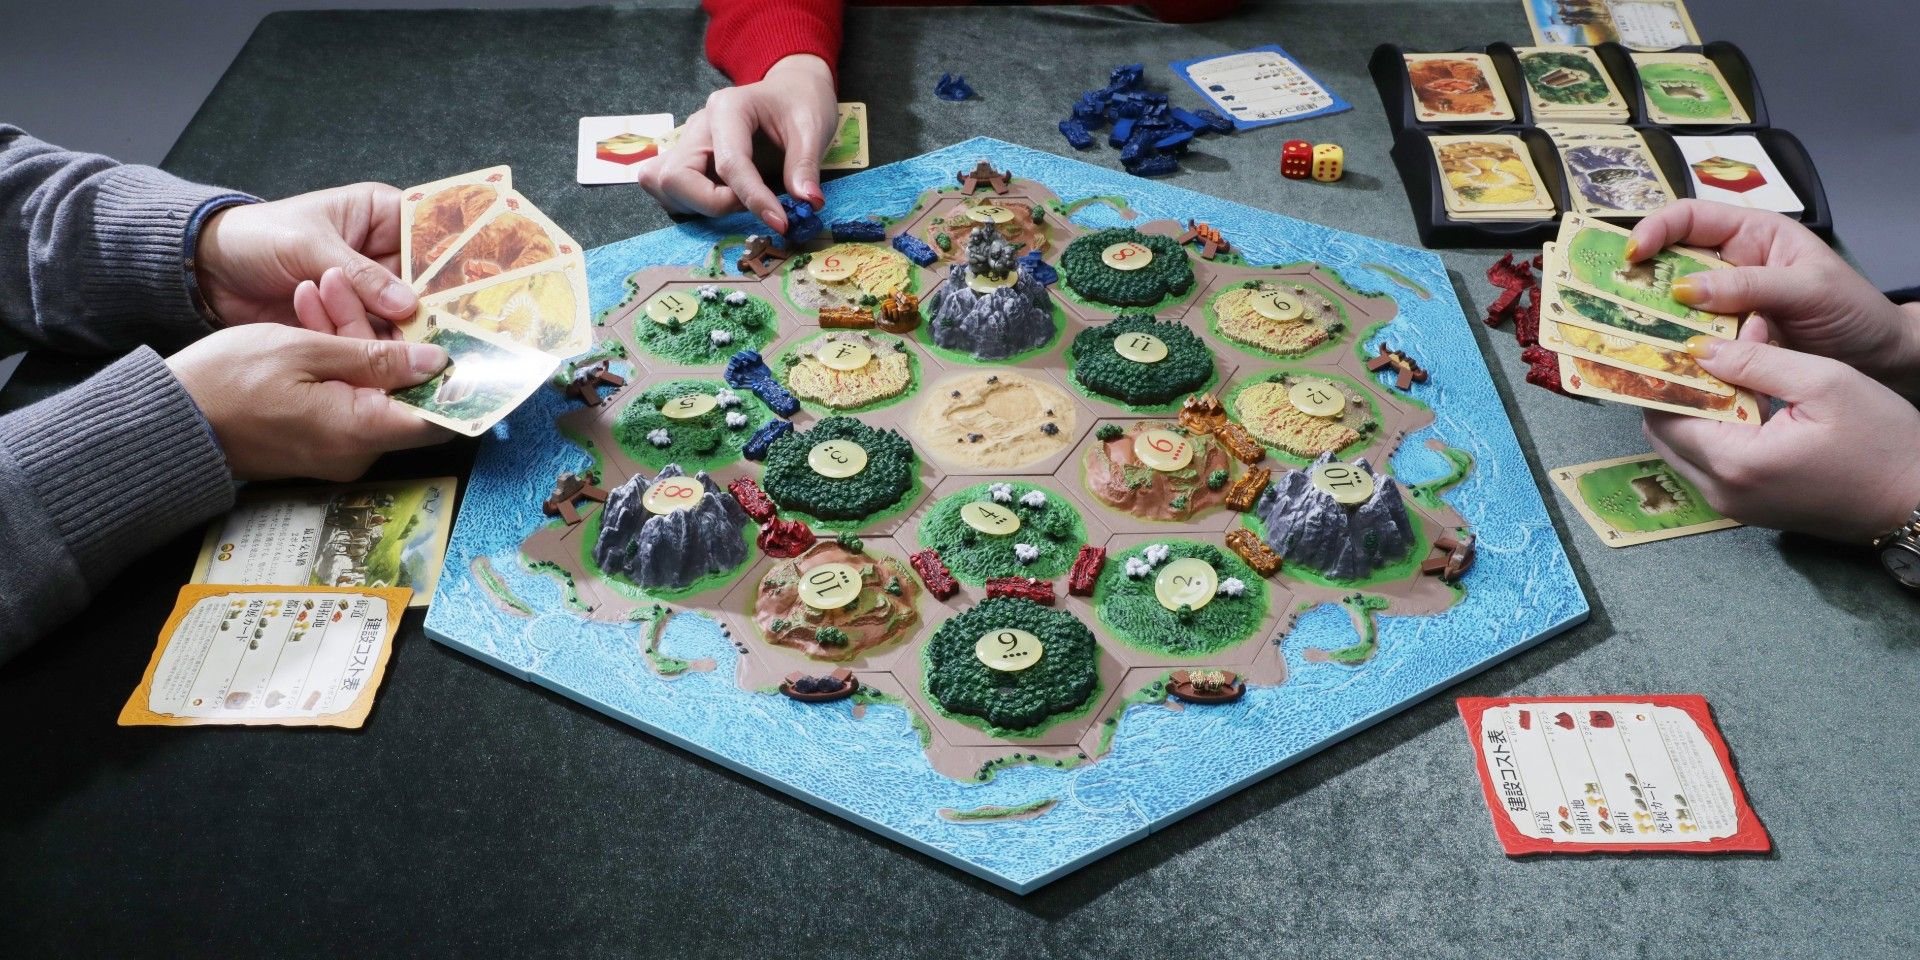 Several players with a 3D version of Settlers of Catan.